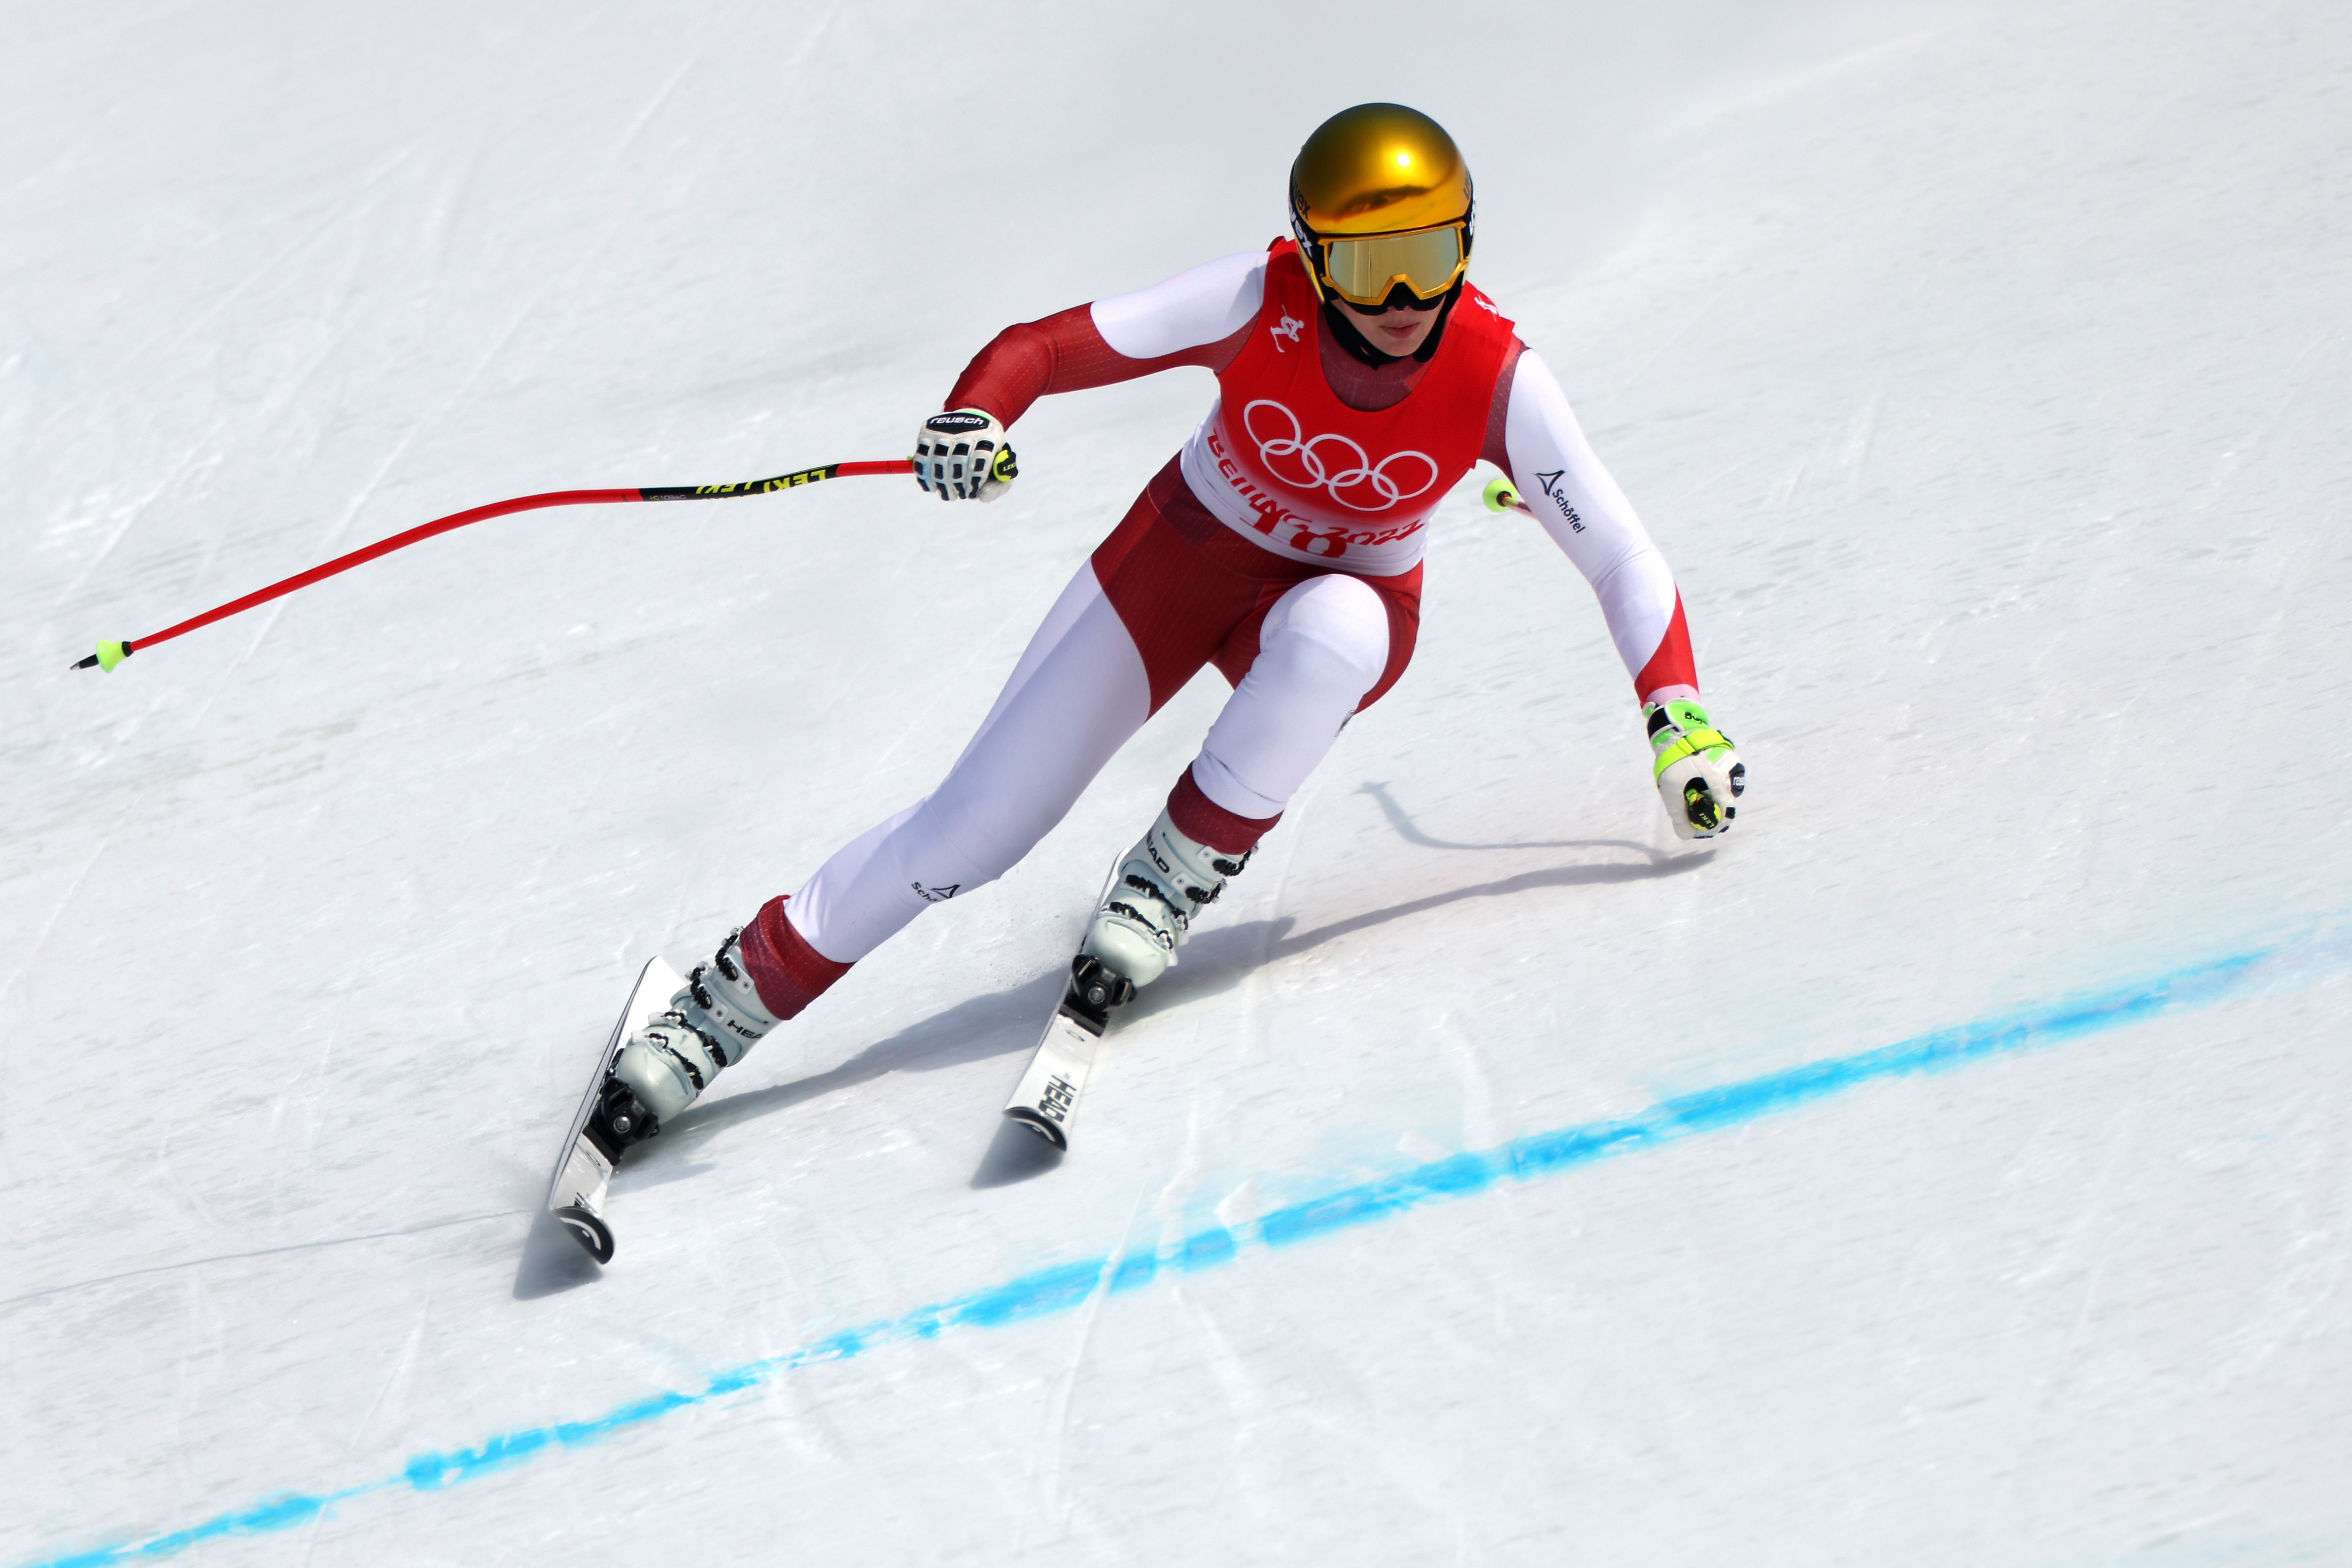 Olympic Women’s Alpine Skiing Results 2022: Full Results for Combined Downhill